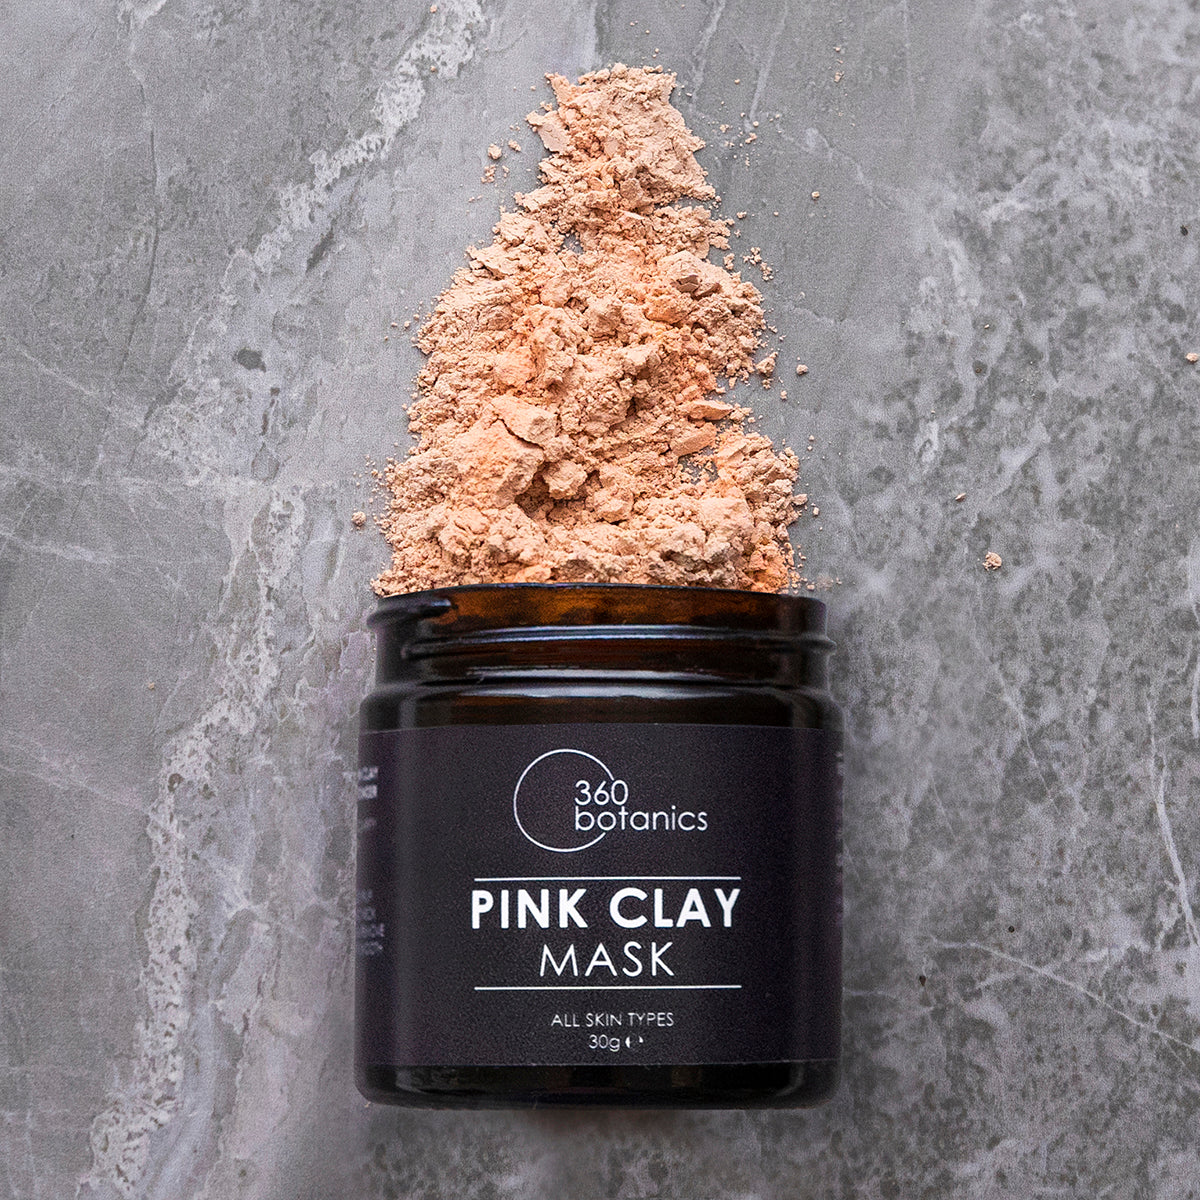 Pink clay Mask amber jar, pink powder spilling out of lid on grey marble surface